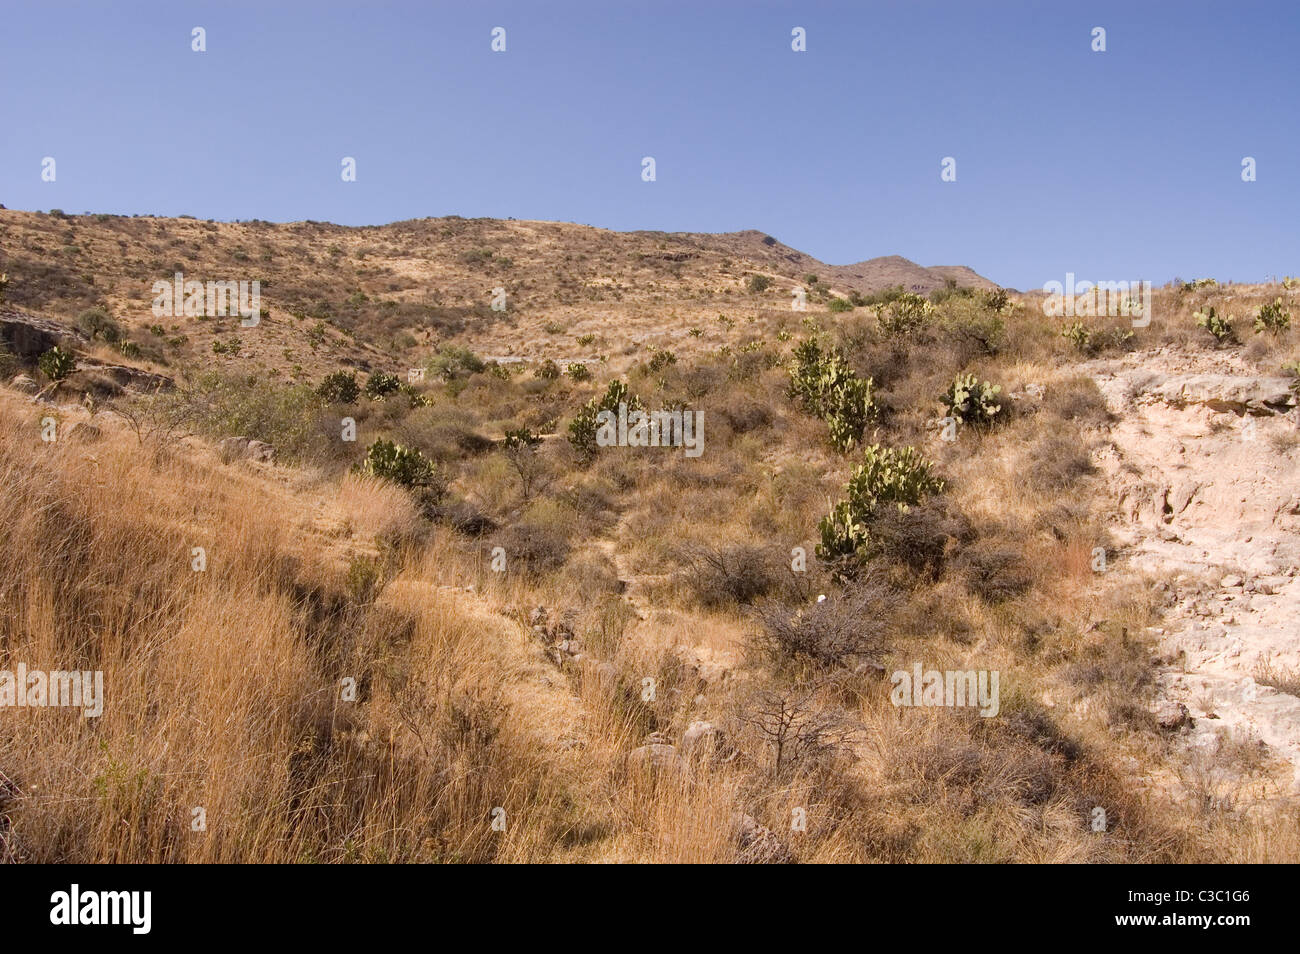 Central Mexico landscape during the dry season Stock Photo